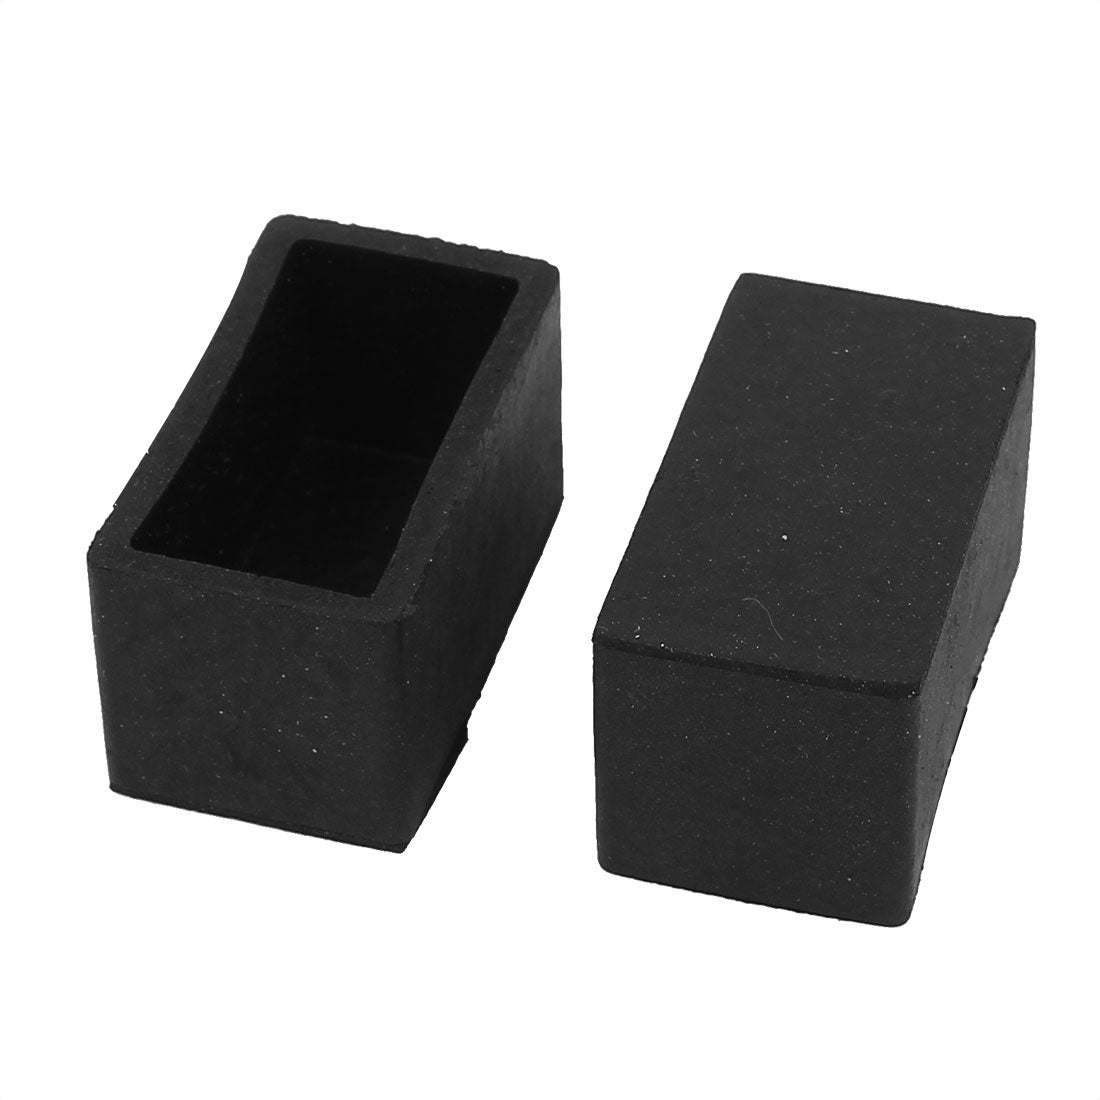 uxcell Uxcell Rectangle Shaped Furniture Table Chair Leg Foot Plastic Cover Cap Black 40mm x 20mm 8pcs